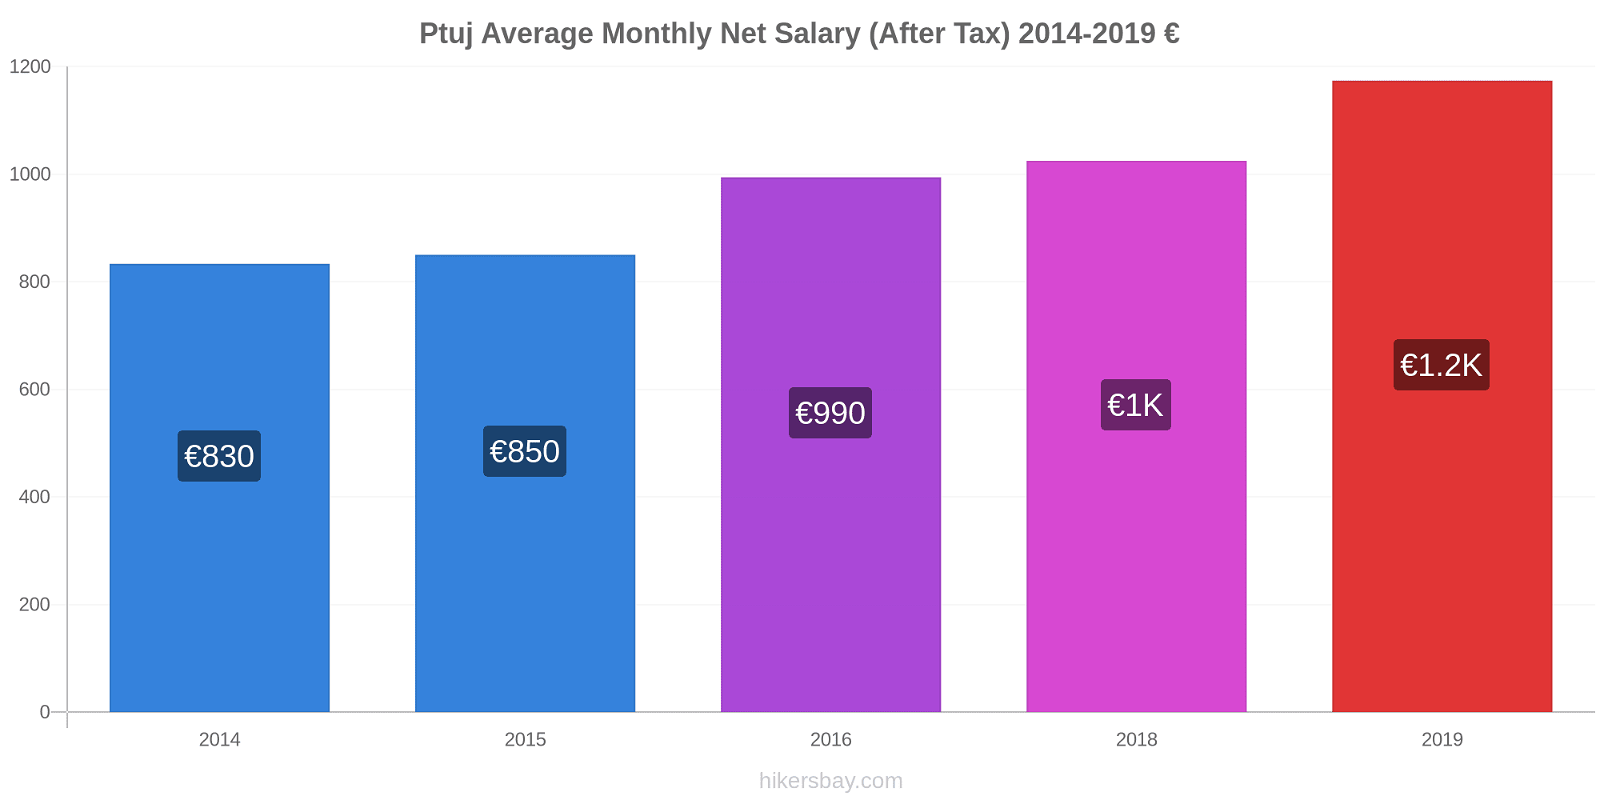 Ptuj price changes Average Monthly Net Salary (After Tax) hikersbay.com